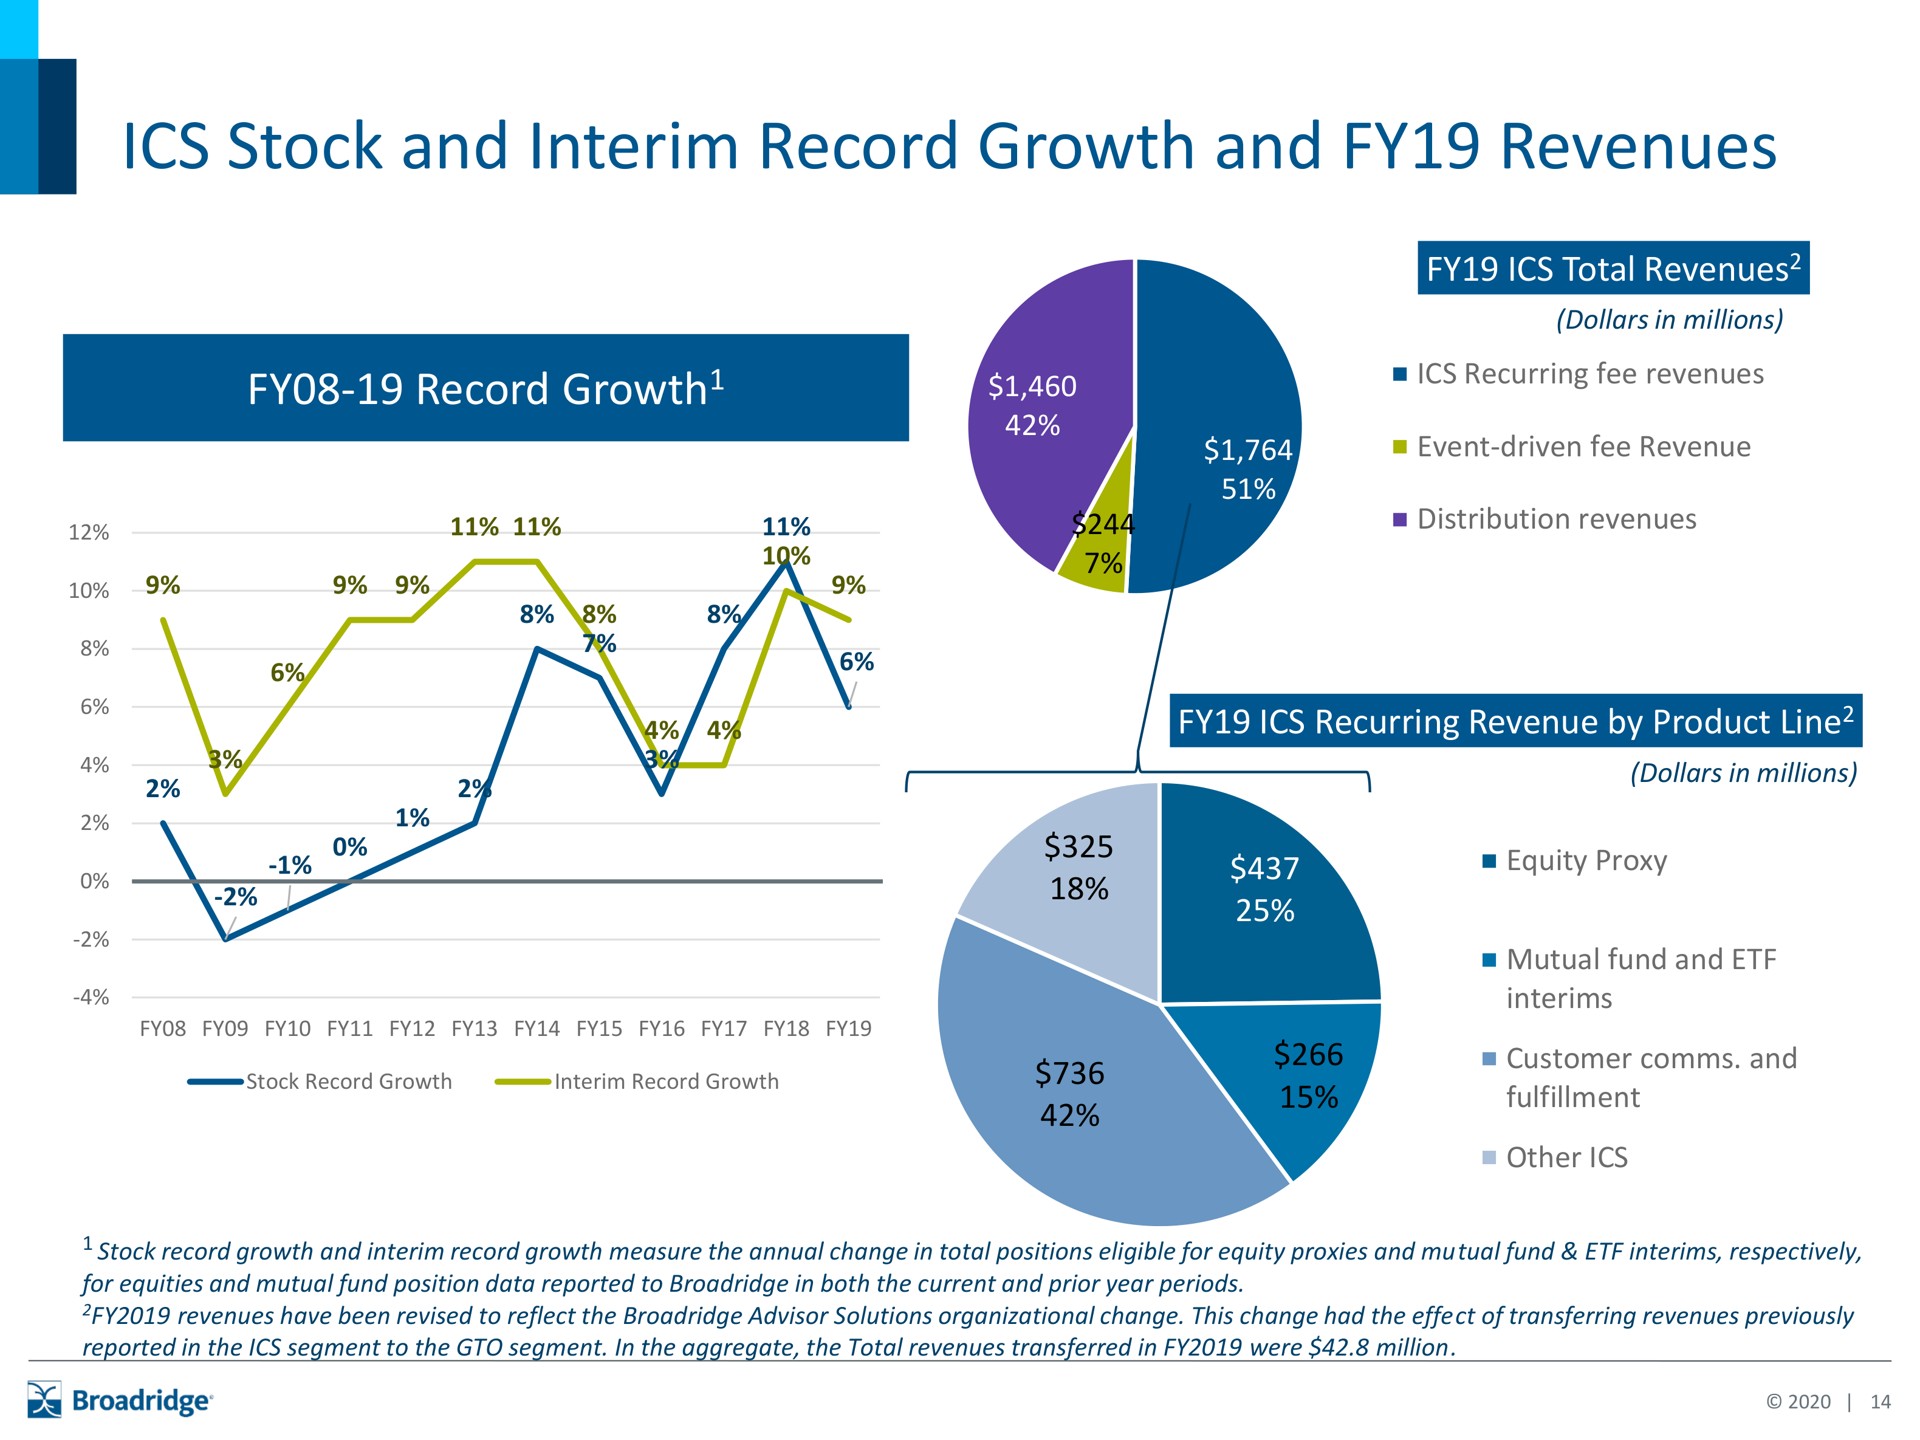 stock and interim record growth and revenues | Broadridge Financial Solutions